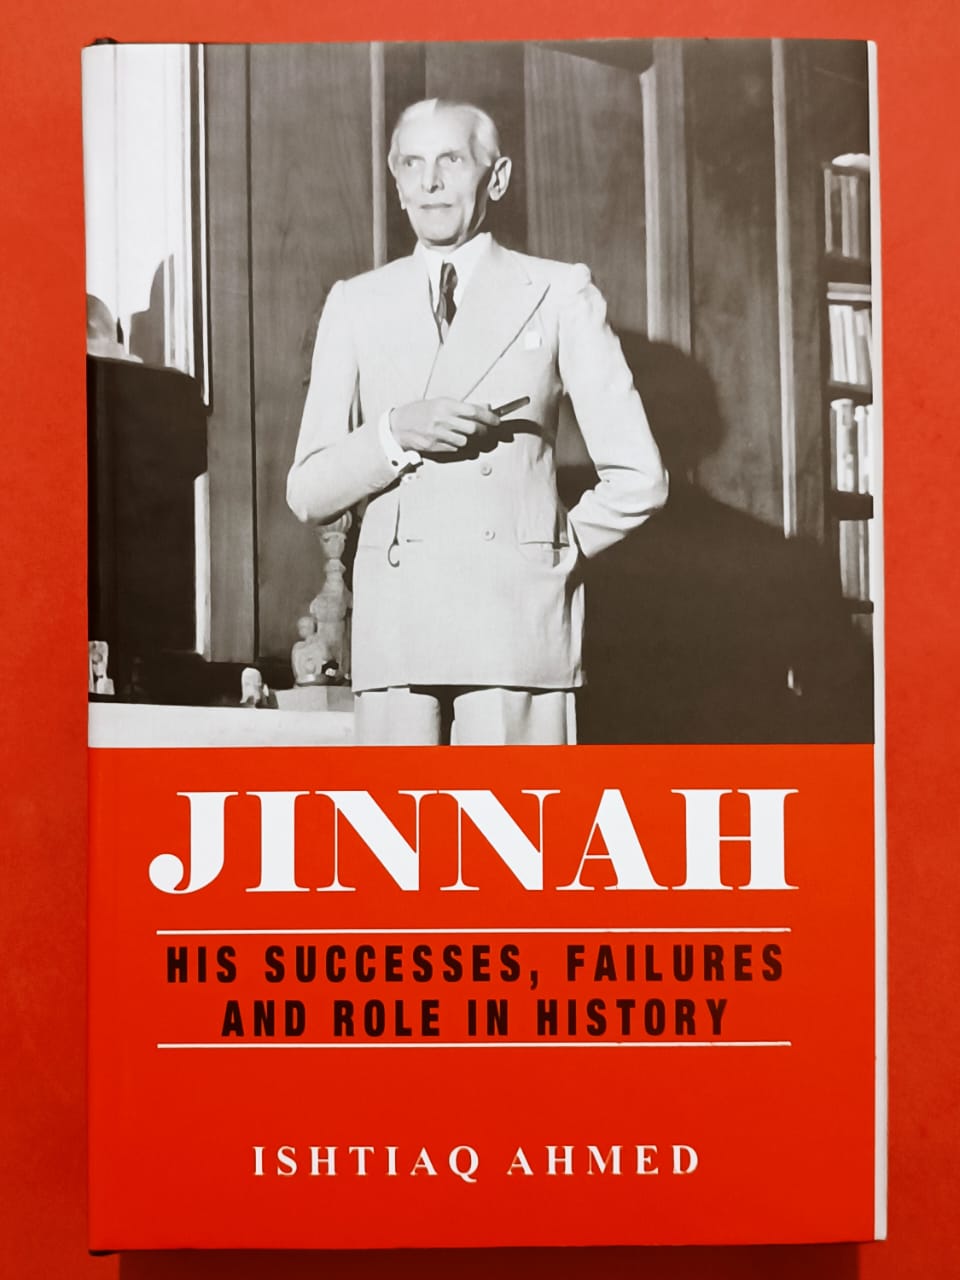 JINNAH His Success, Failures And Role in History By ISHTIAQ AHMED